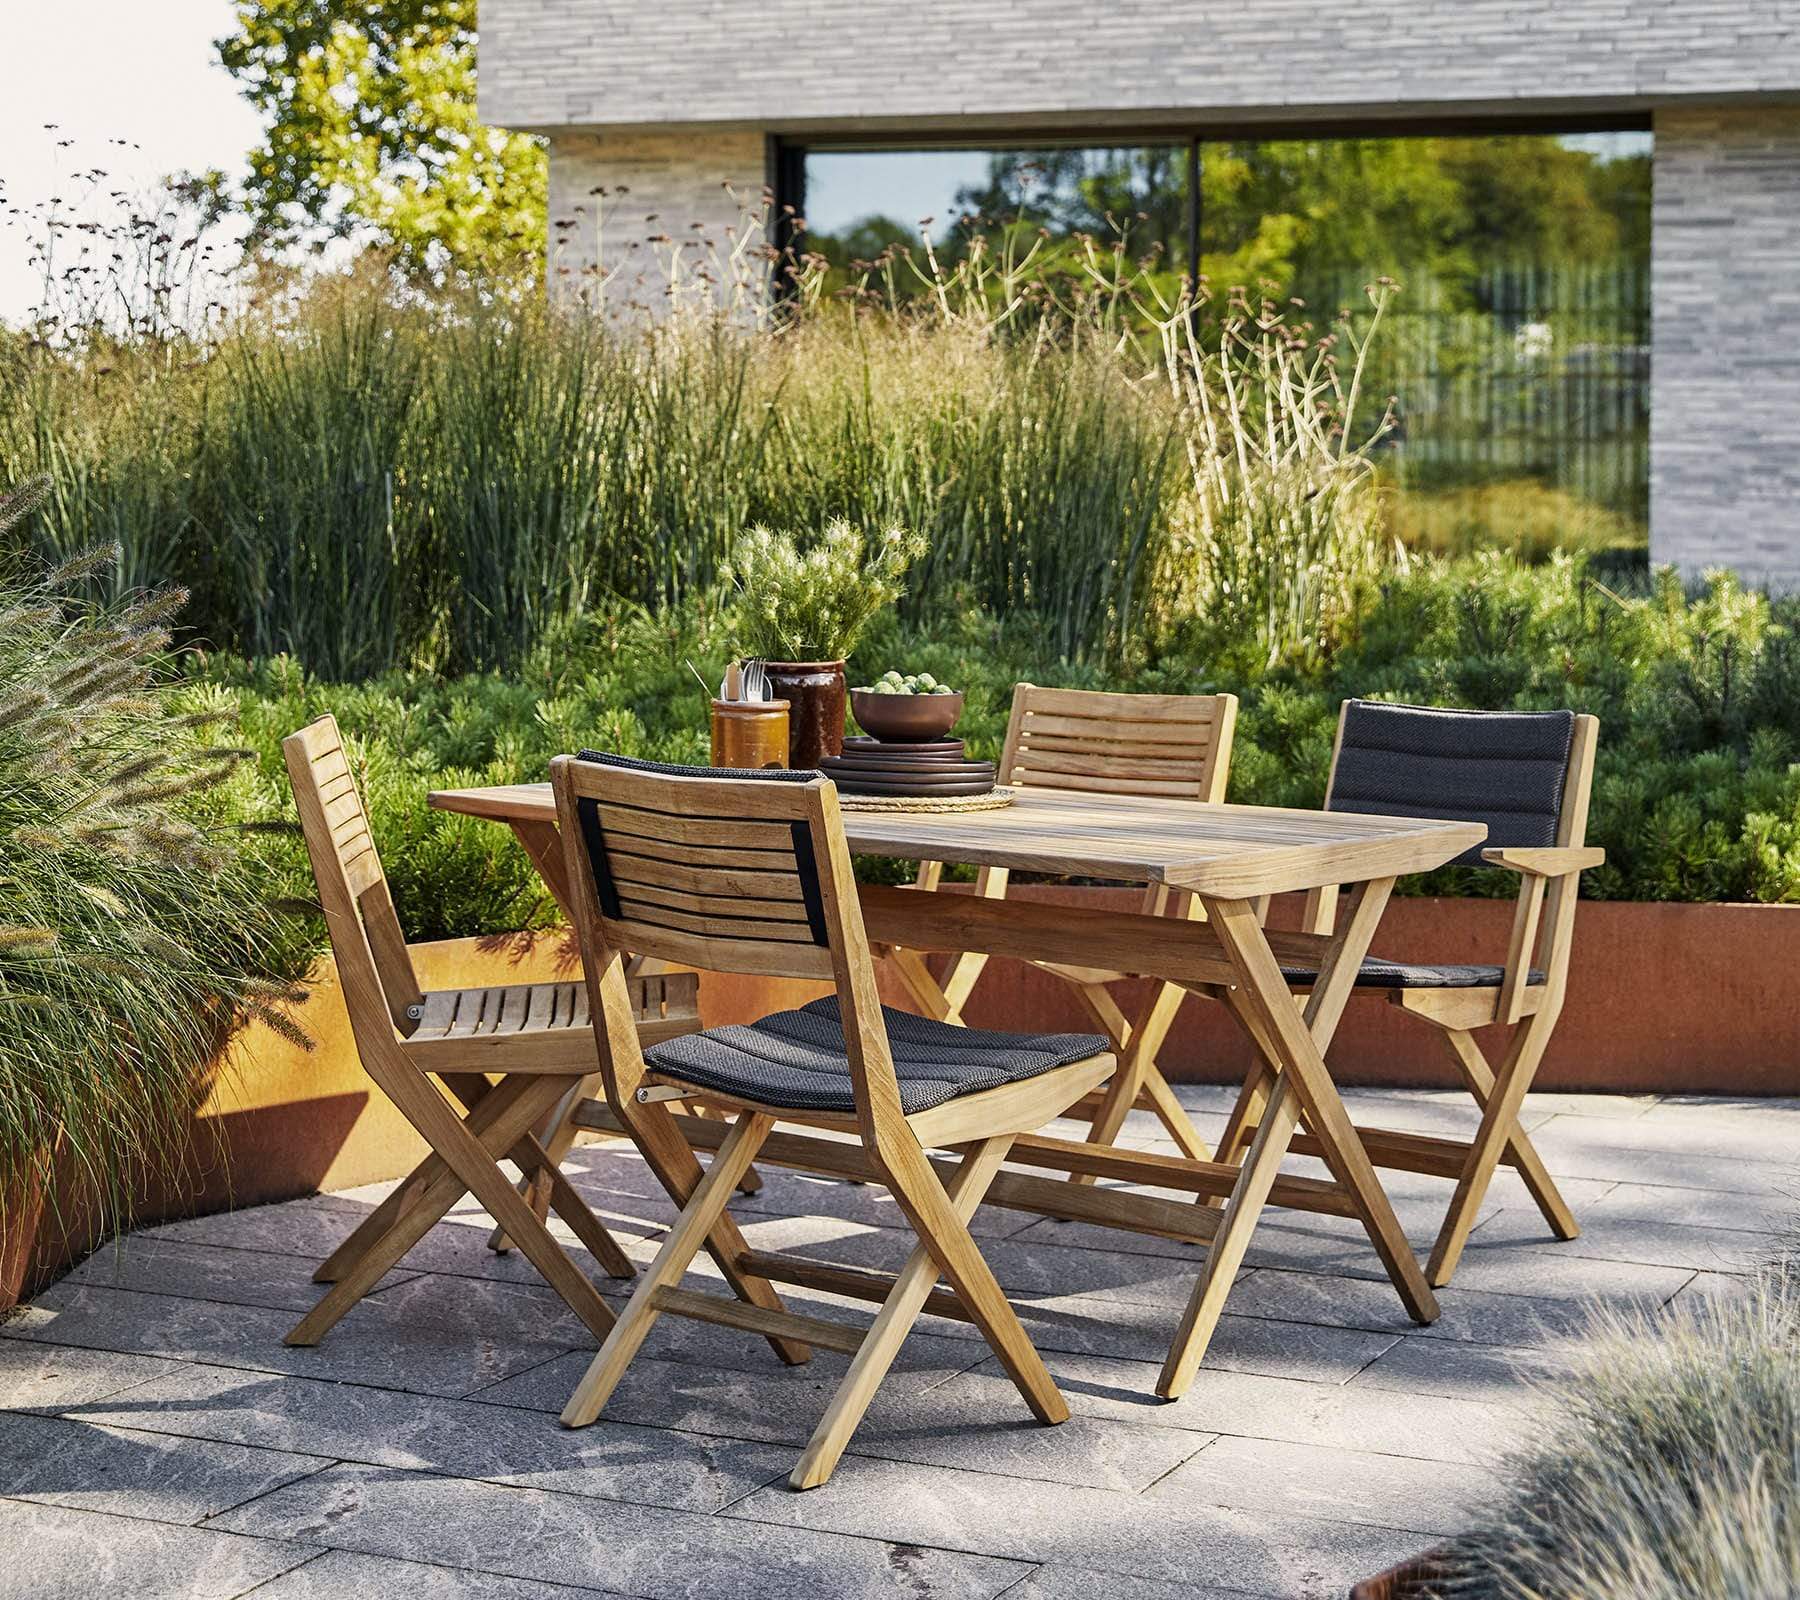 Boxhill's Flip Folding Outdoor Teak Dining Armchair lifestyle image with Flip Folding Outdoor Teak Dining Table beside plants at patio